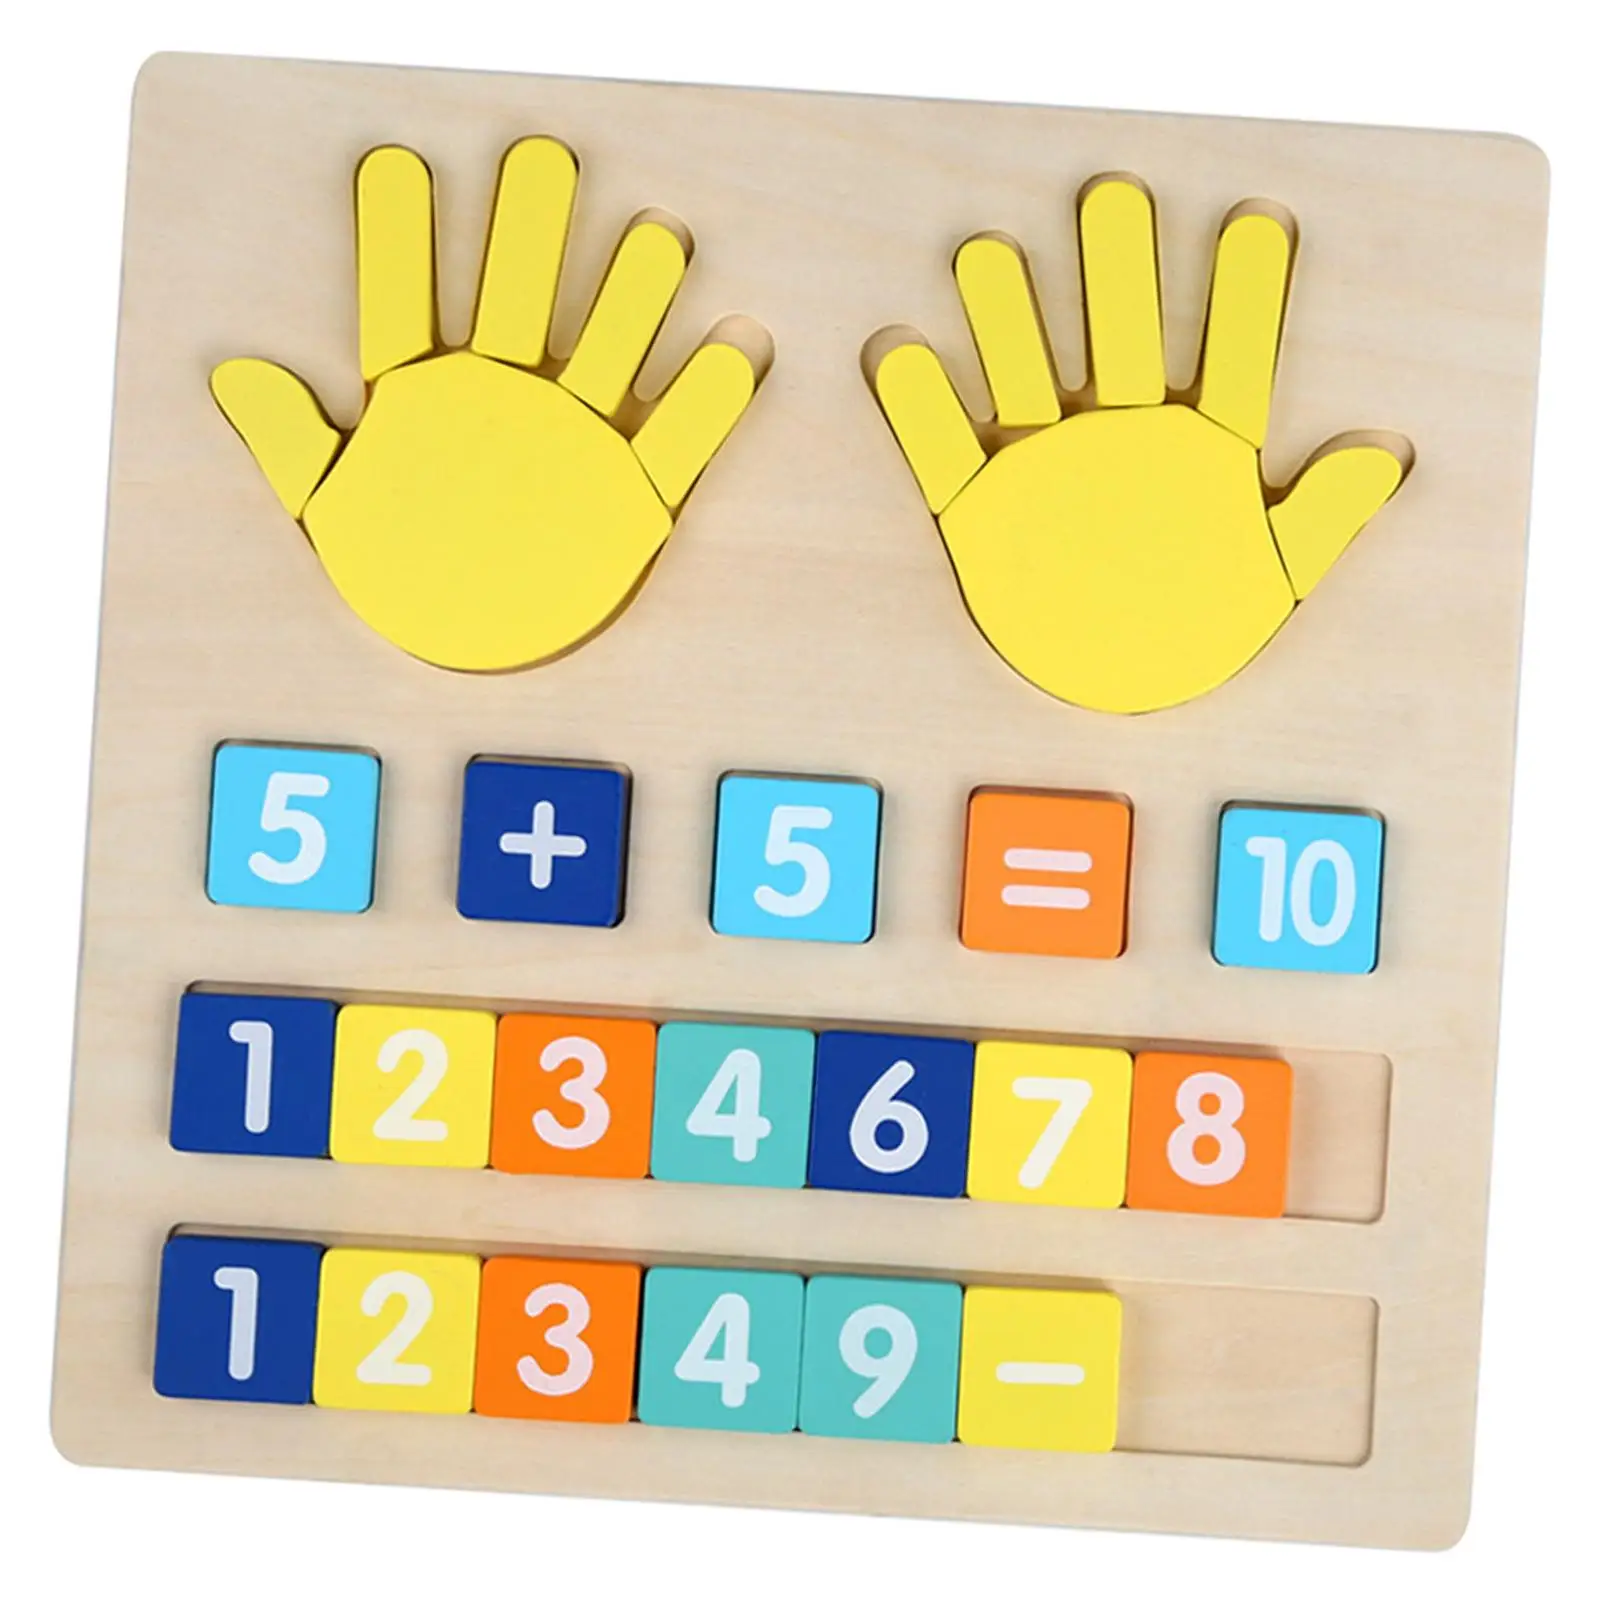 Mathematics Busy Board Learning Wood Finger Numbers Counting Toy for Kindergarten Gift Preschool Activity Cognitive Development